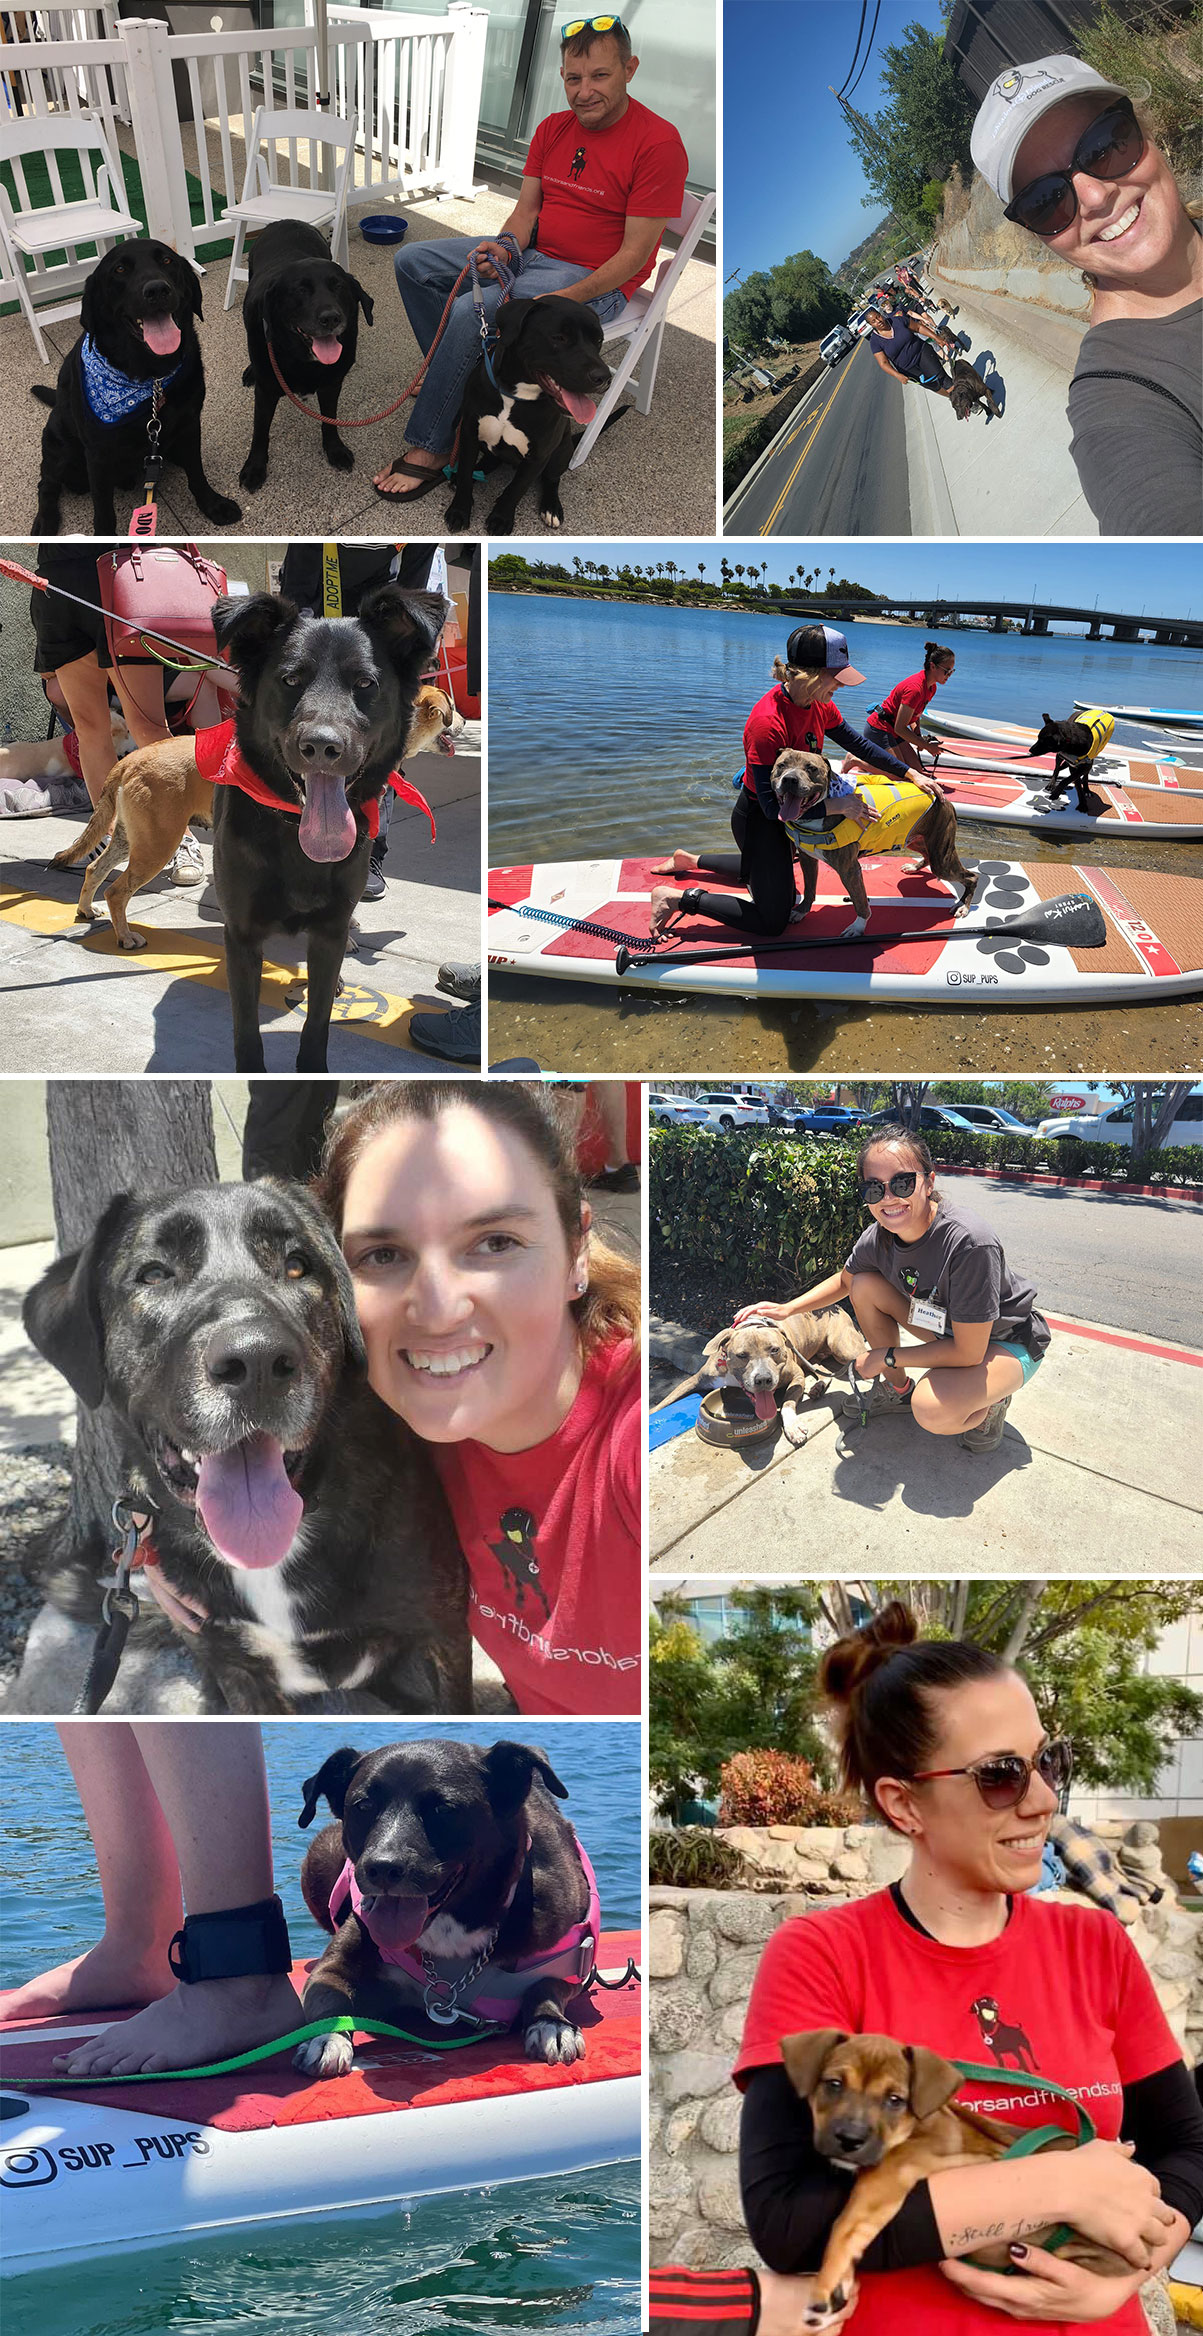 collage of event photos containing both dogs and people